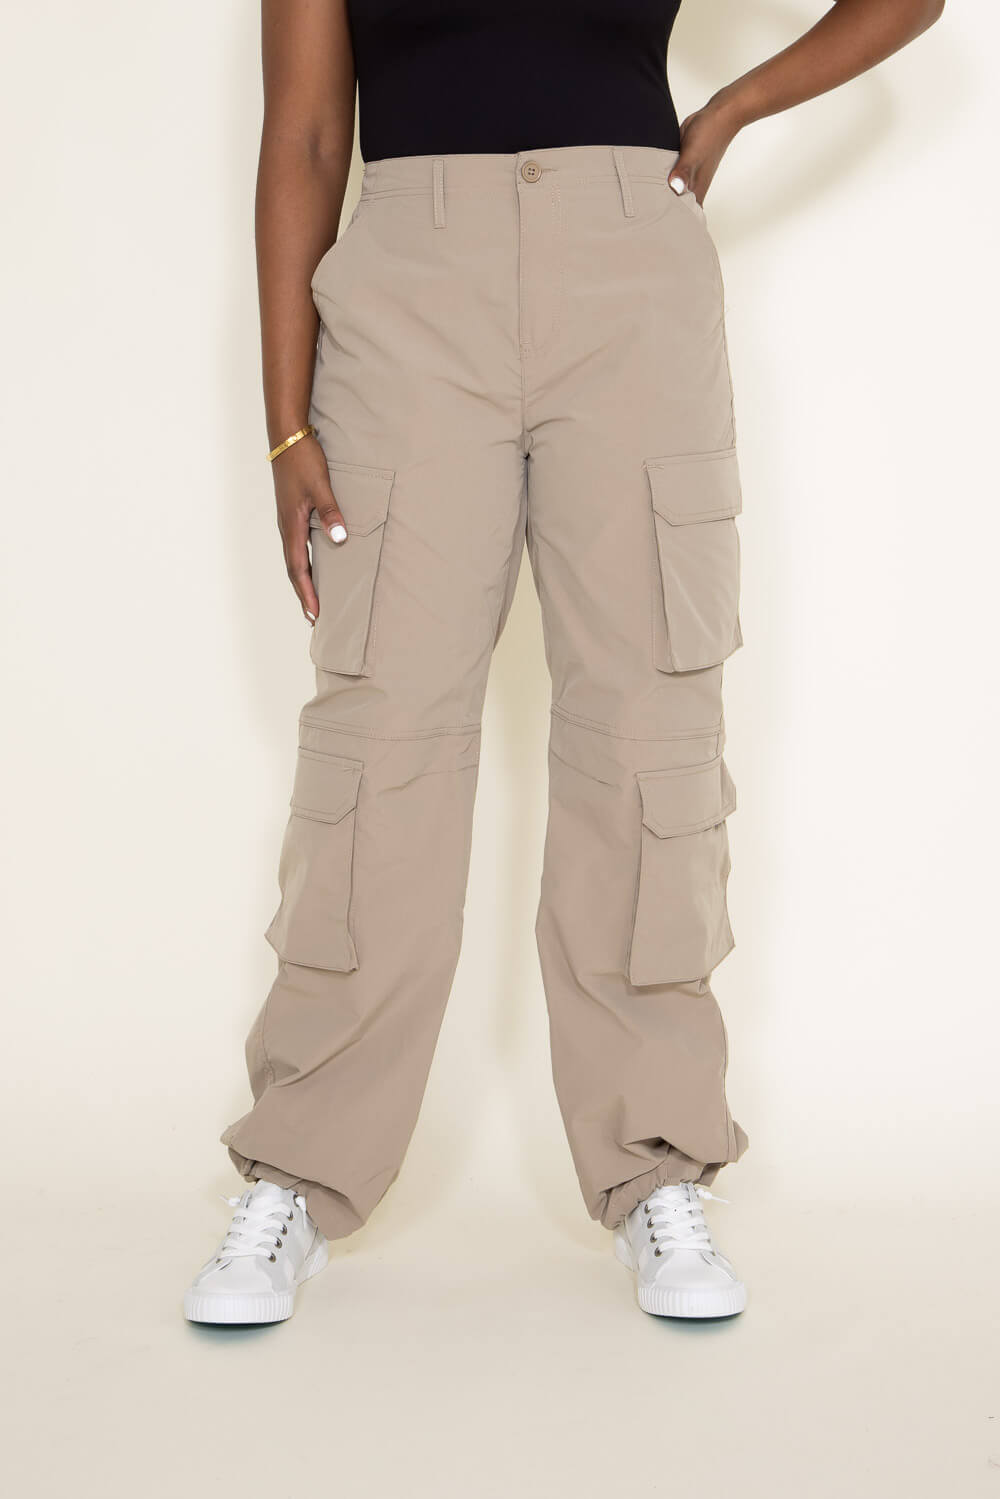 YYDGH Women's Hiking Cargo Pants Joggers Cotton Casual Army Work Pants with  Pockets Beige Beige - Walmart.com